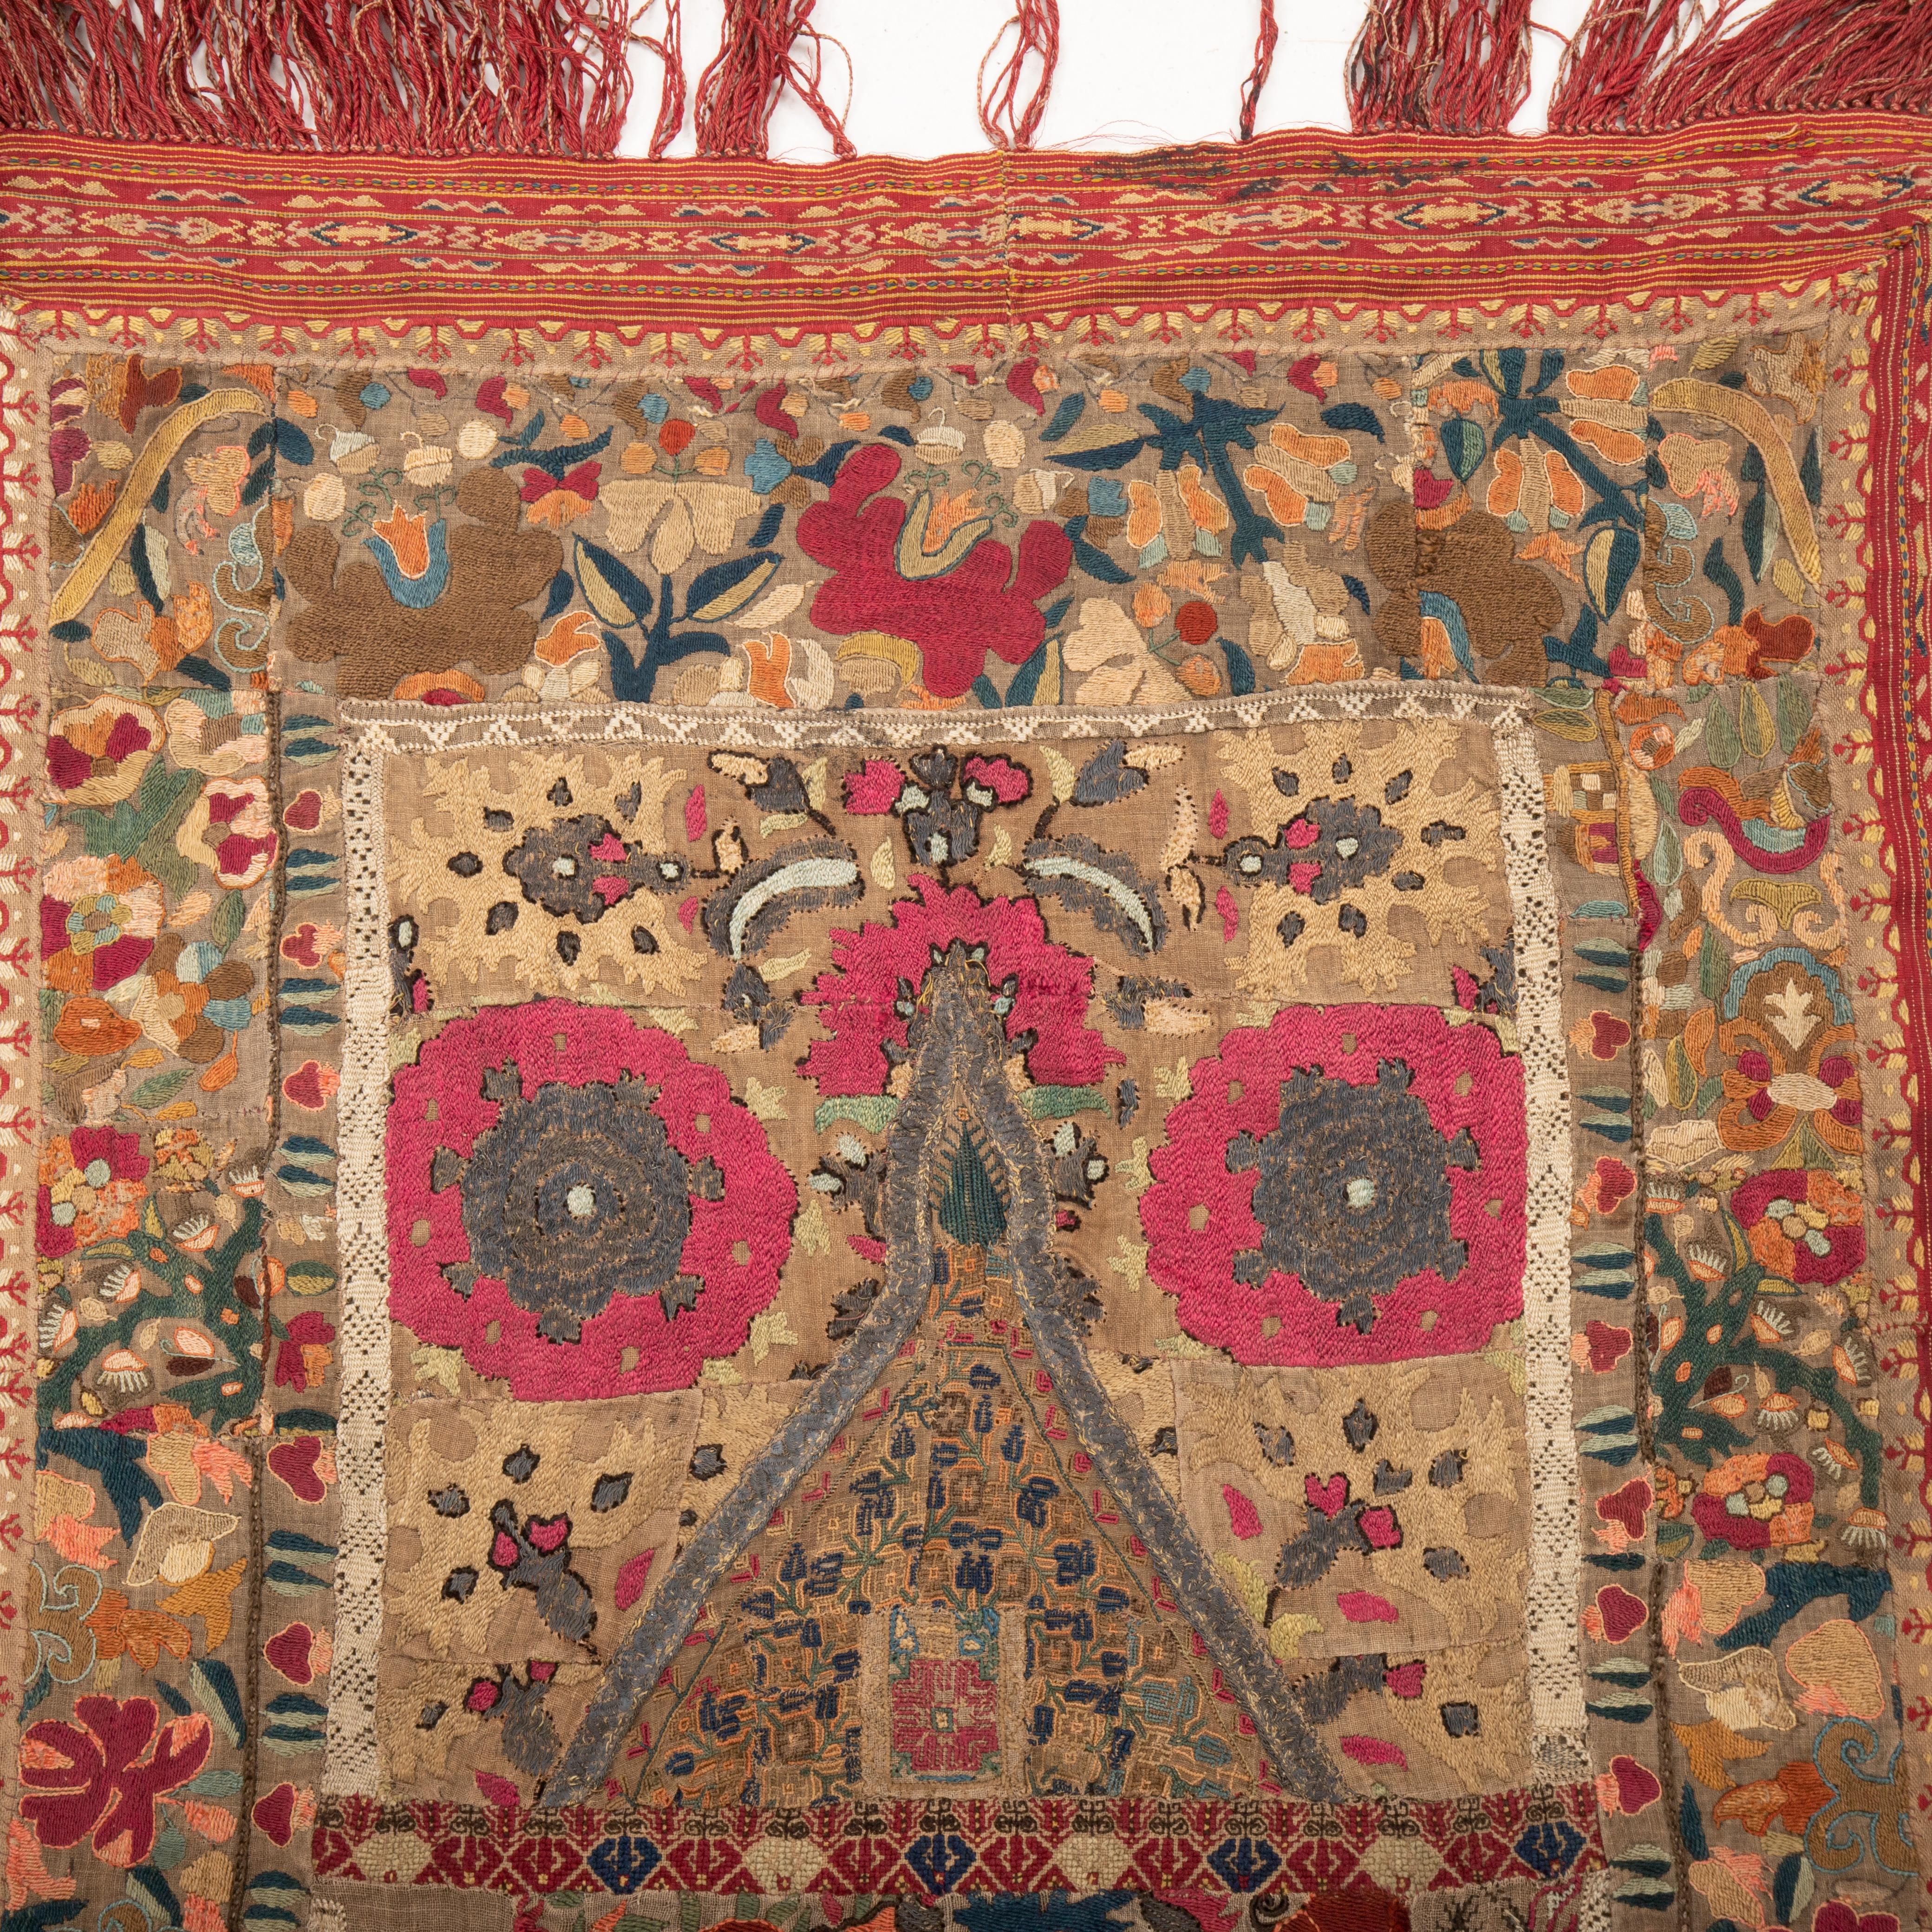 Silk Prayer Arch made from antique Greek embroidery Fragments in the 19th C. For Sale